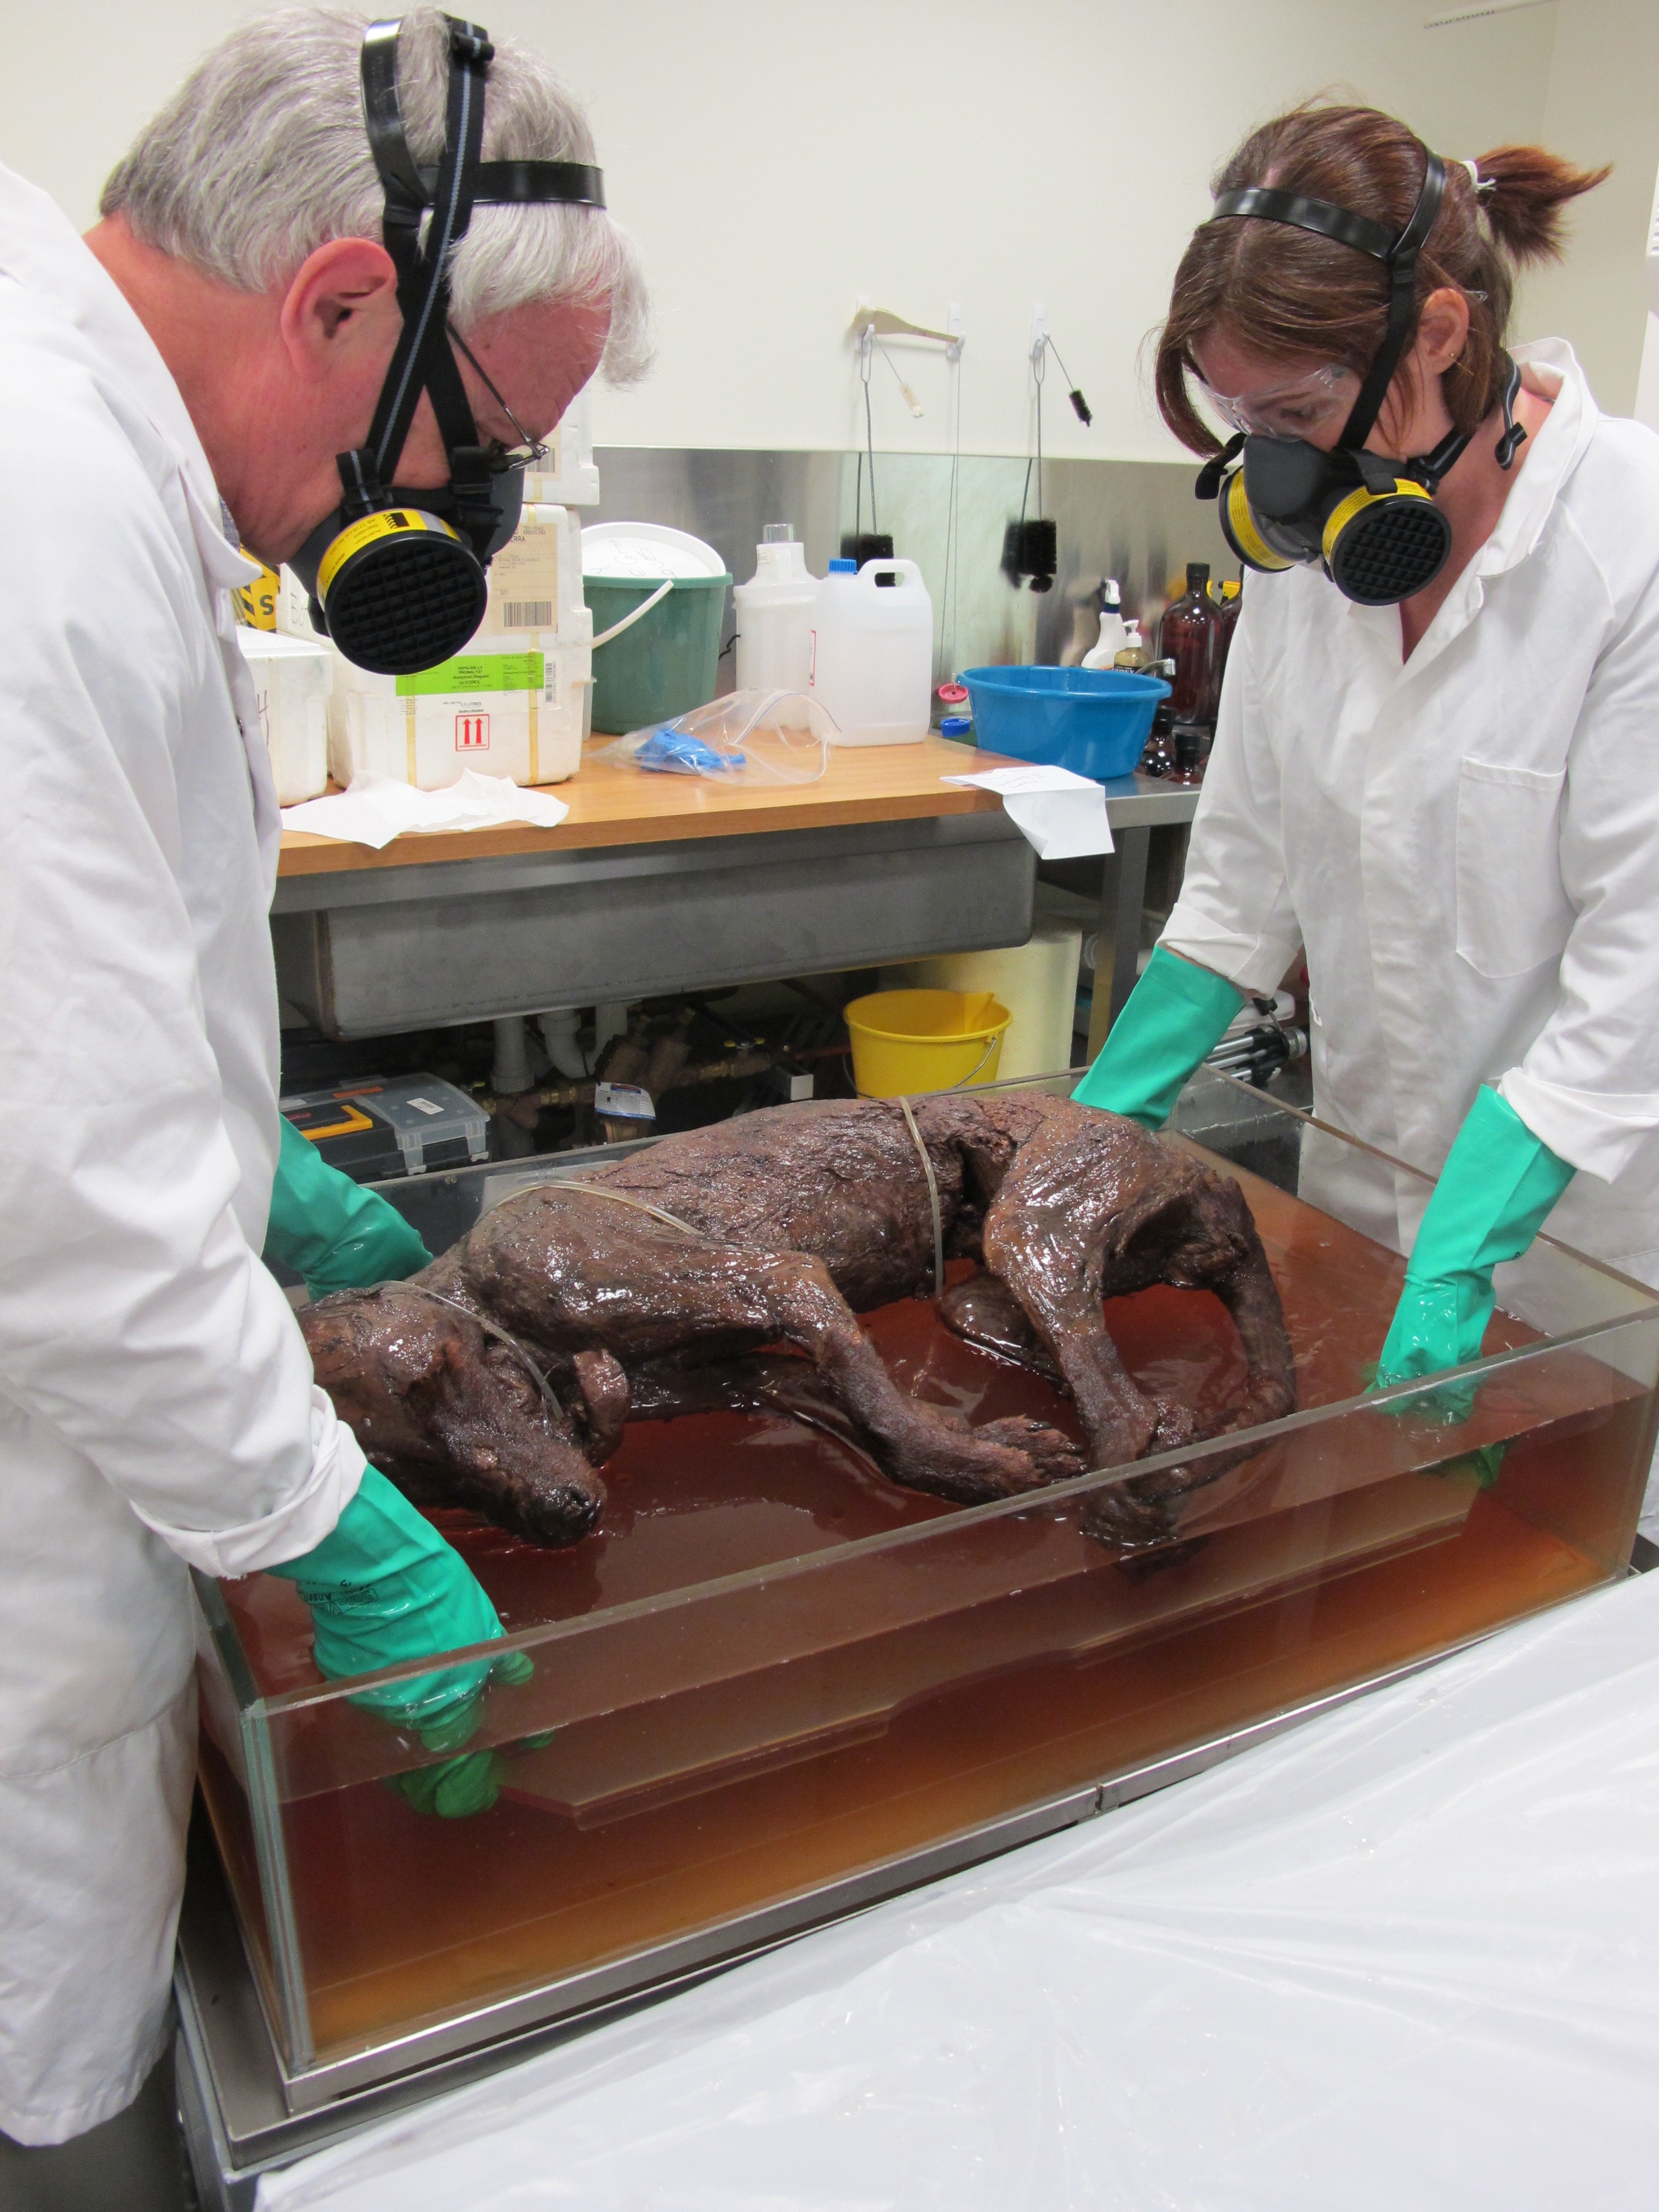 Photograph of a man and woman, both wearing lab coats, rubber gloves and face masks, lifting an animal carcass from a container of fluid